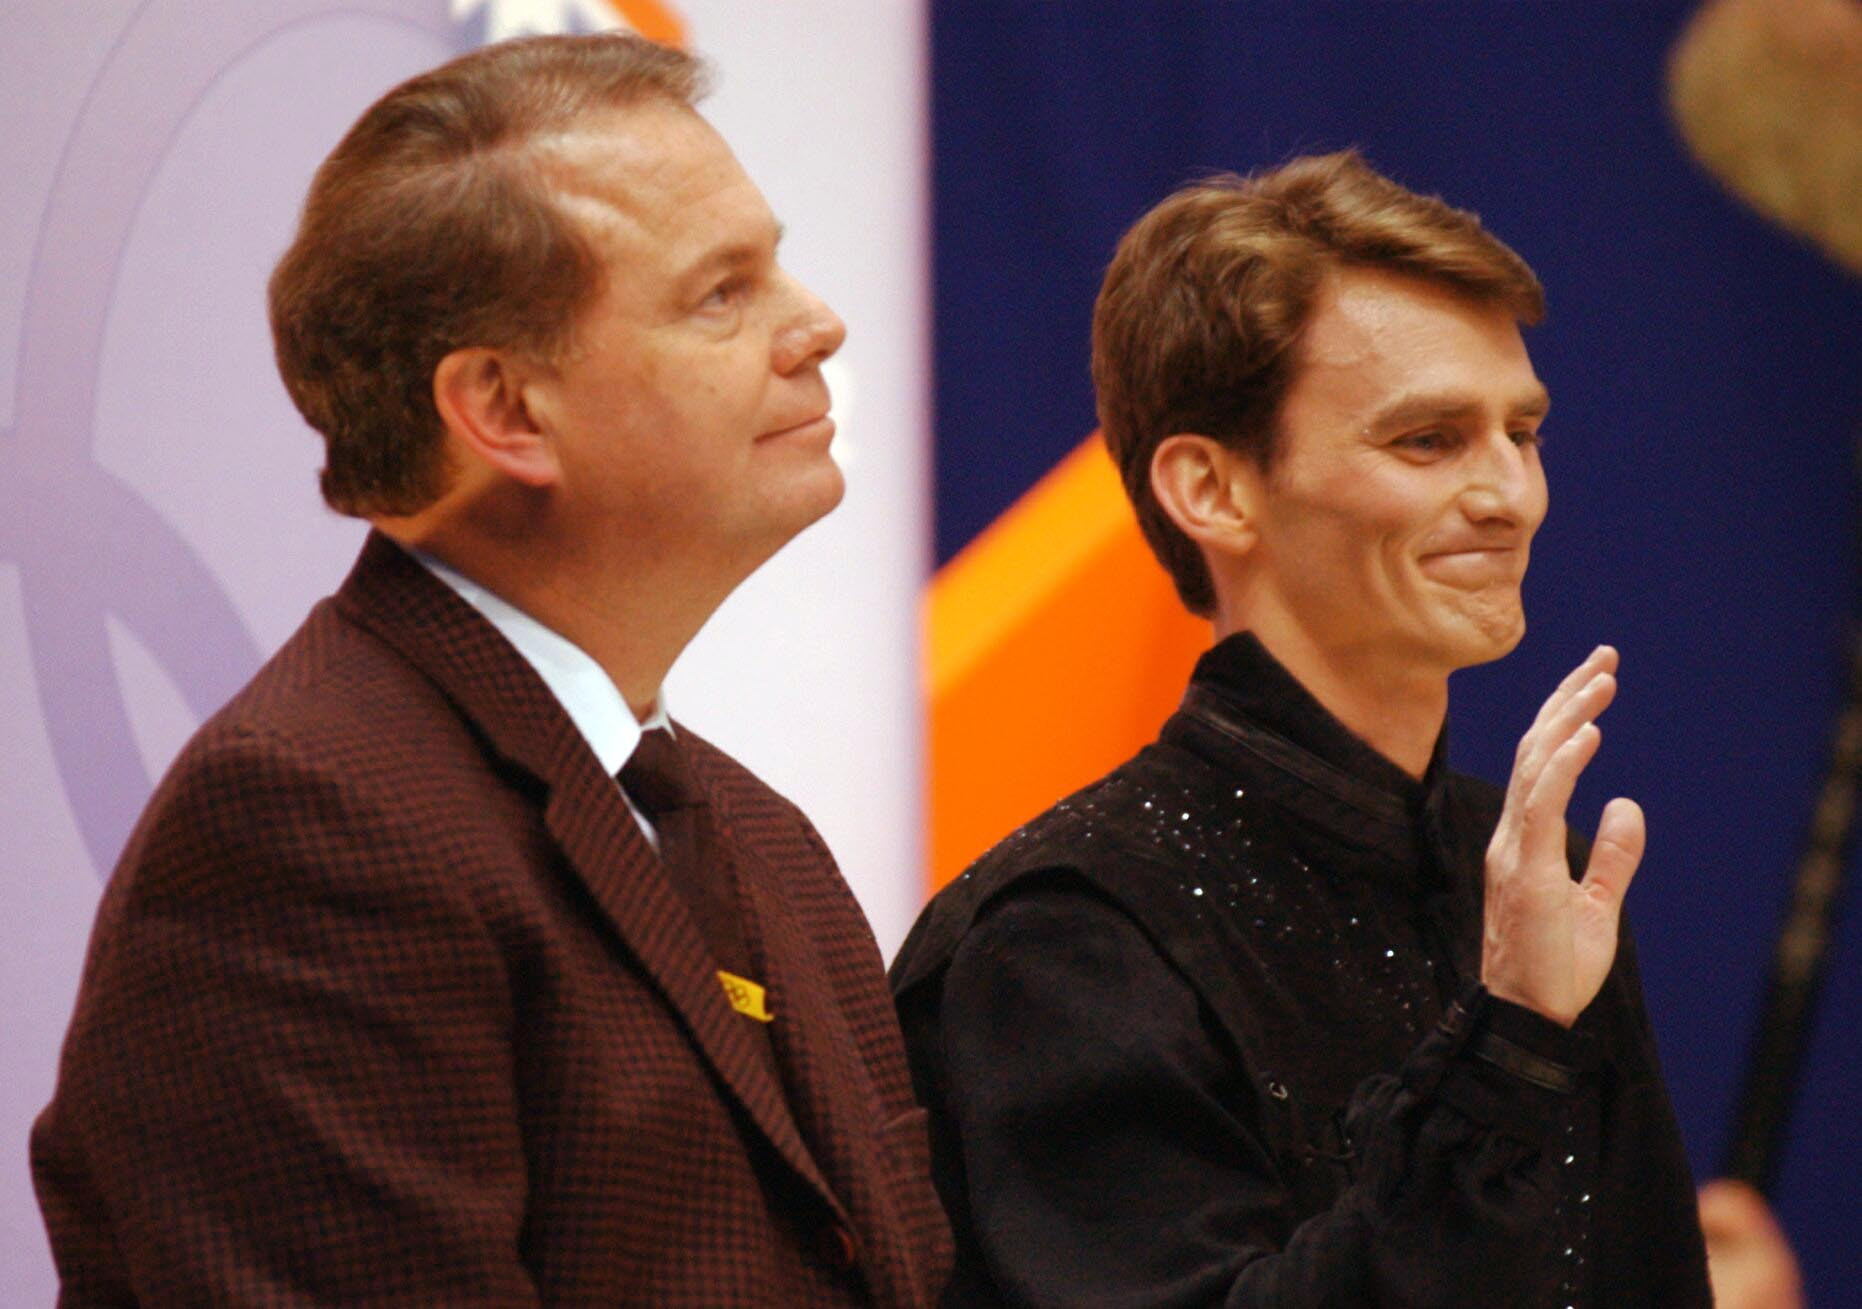 Todd Eldredge, right, also worked with Richard Callaghan, including at the 2002 Winter Olympics in Salt Lake City ©Getty Images